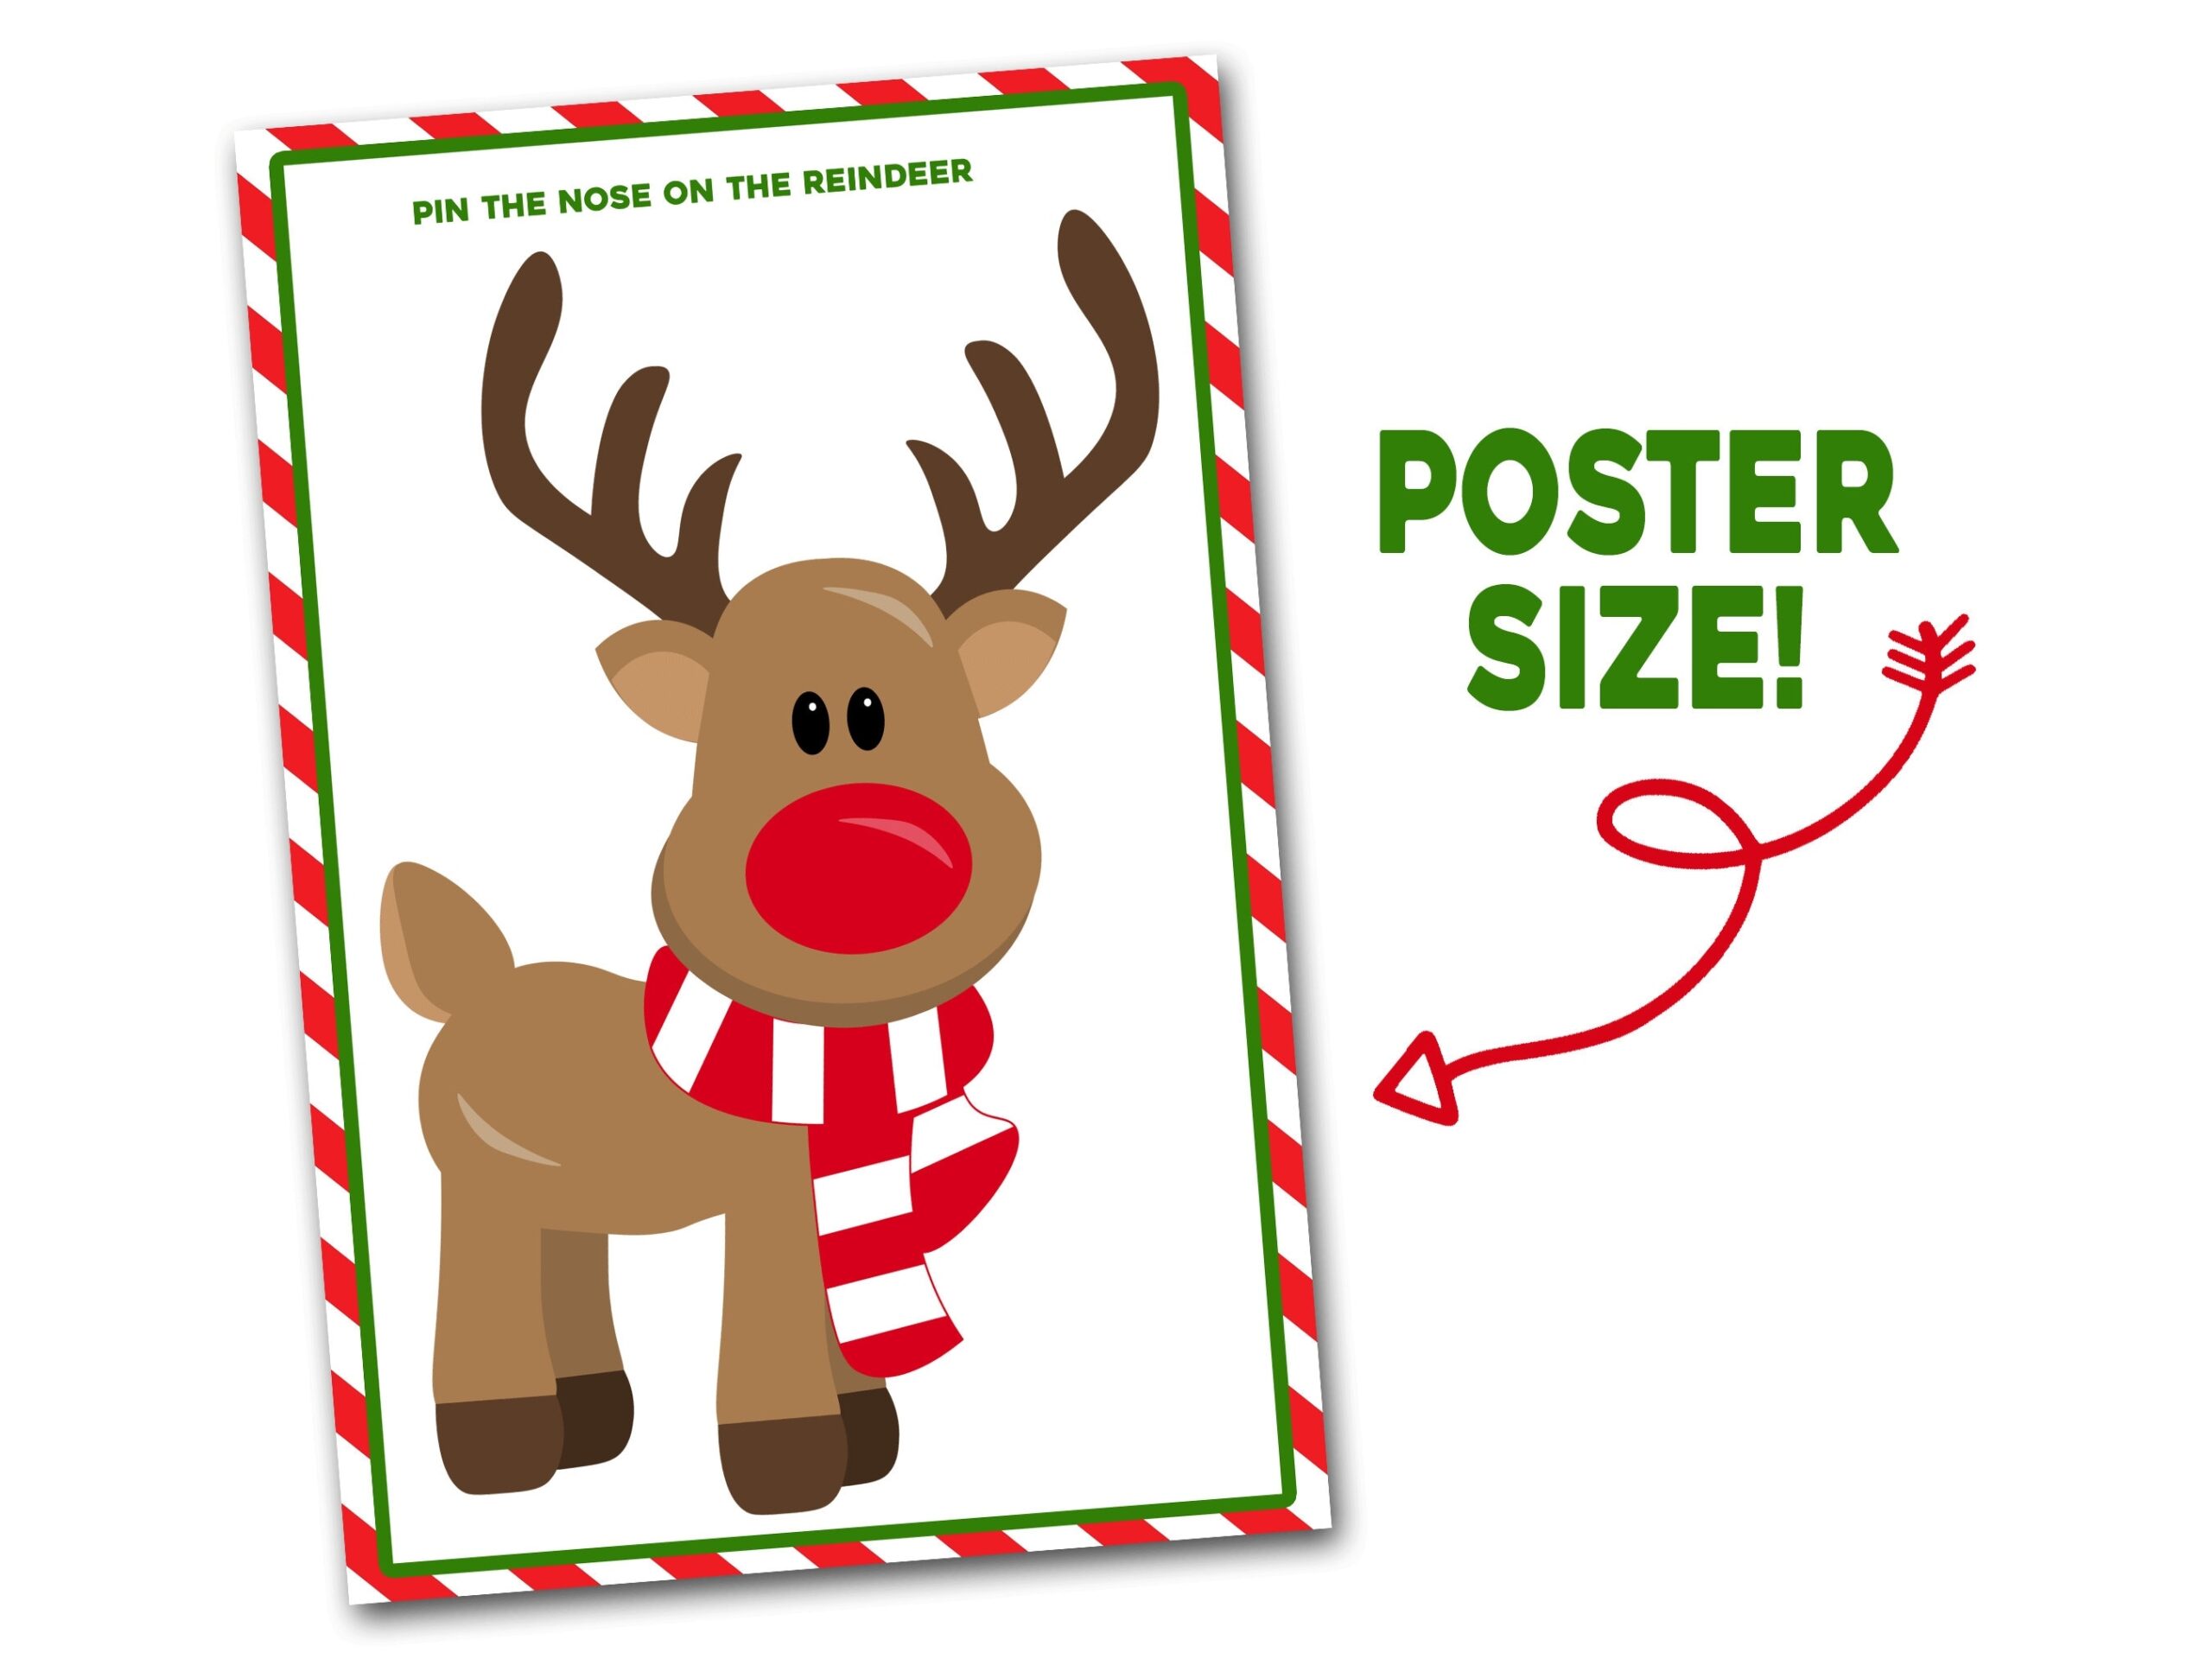 Pin The Nose On The Reindeer Printable Christmas Class Party Game Poster Size Pin The Nose On The Reindeer 20x30 18x24 Holiday Etsy